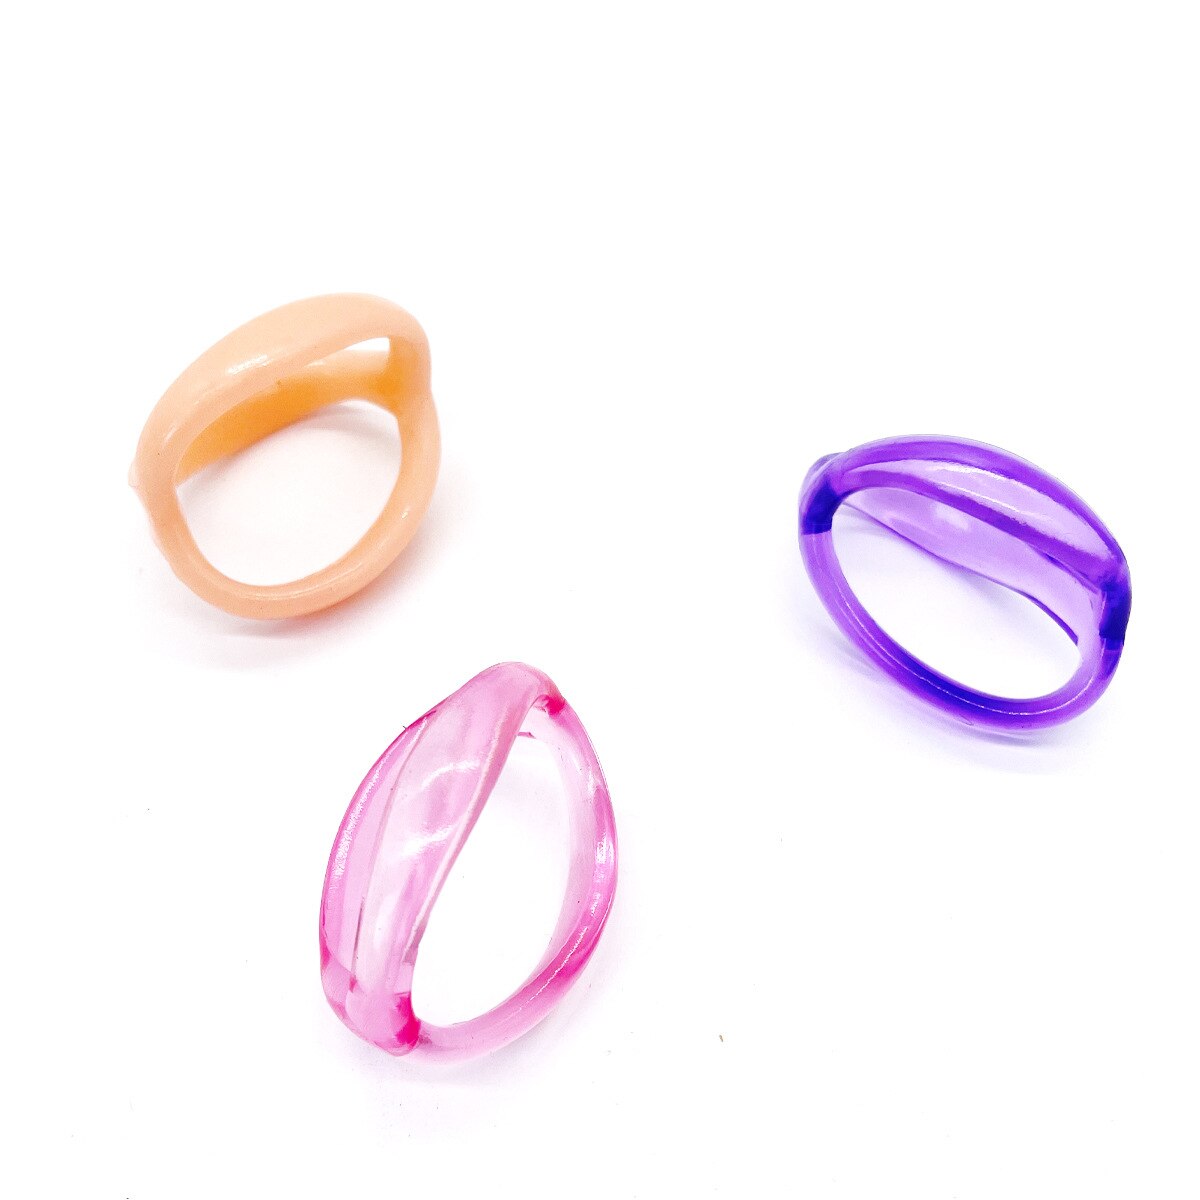 Reusable Silicone Penis Ring for Men 3 in 1 Ultra Soft Stretchy Cock Ring Penis Enlargement Delayed Ejaculation Sex Toy for